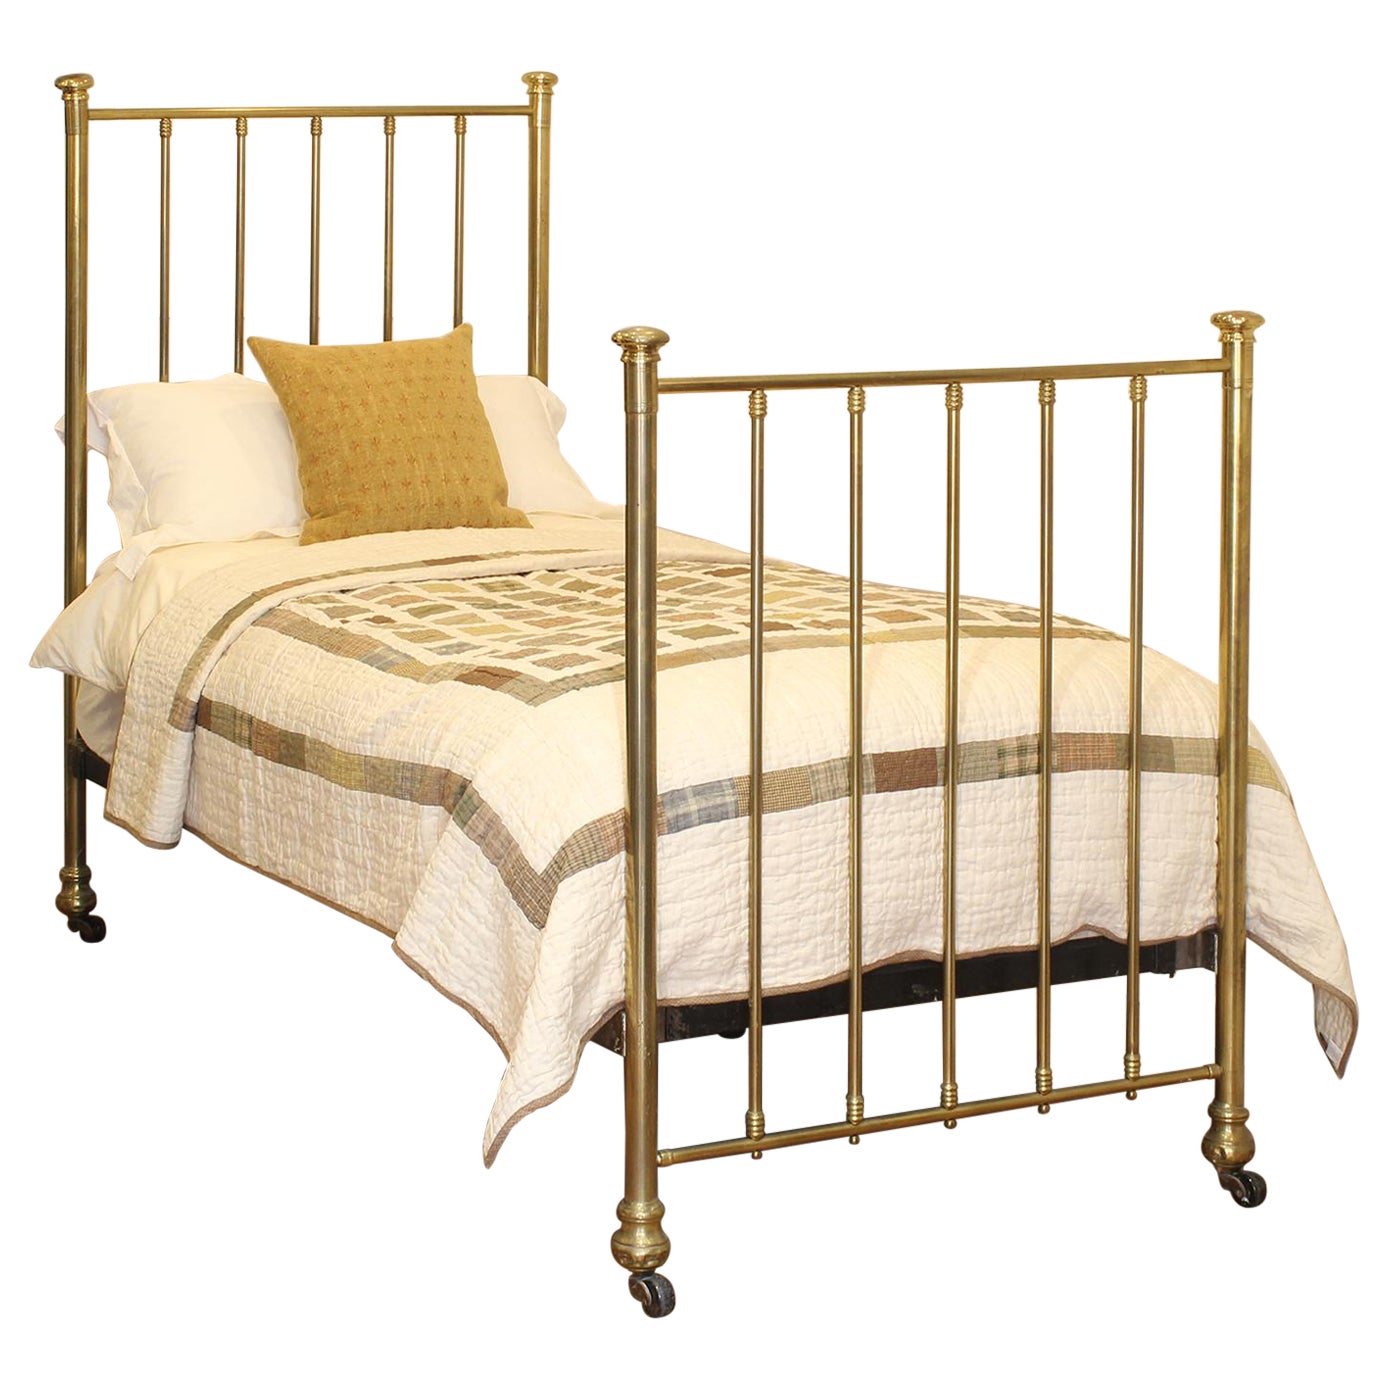 How much is an antique brass bed worth?